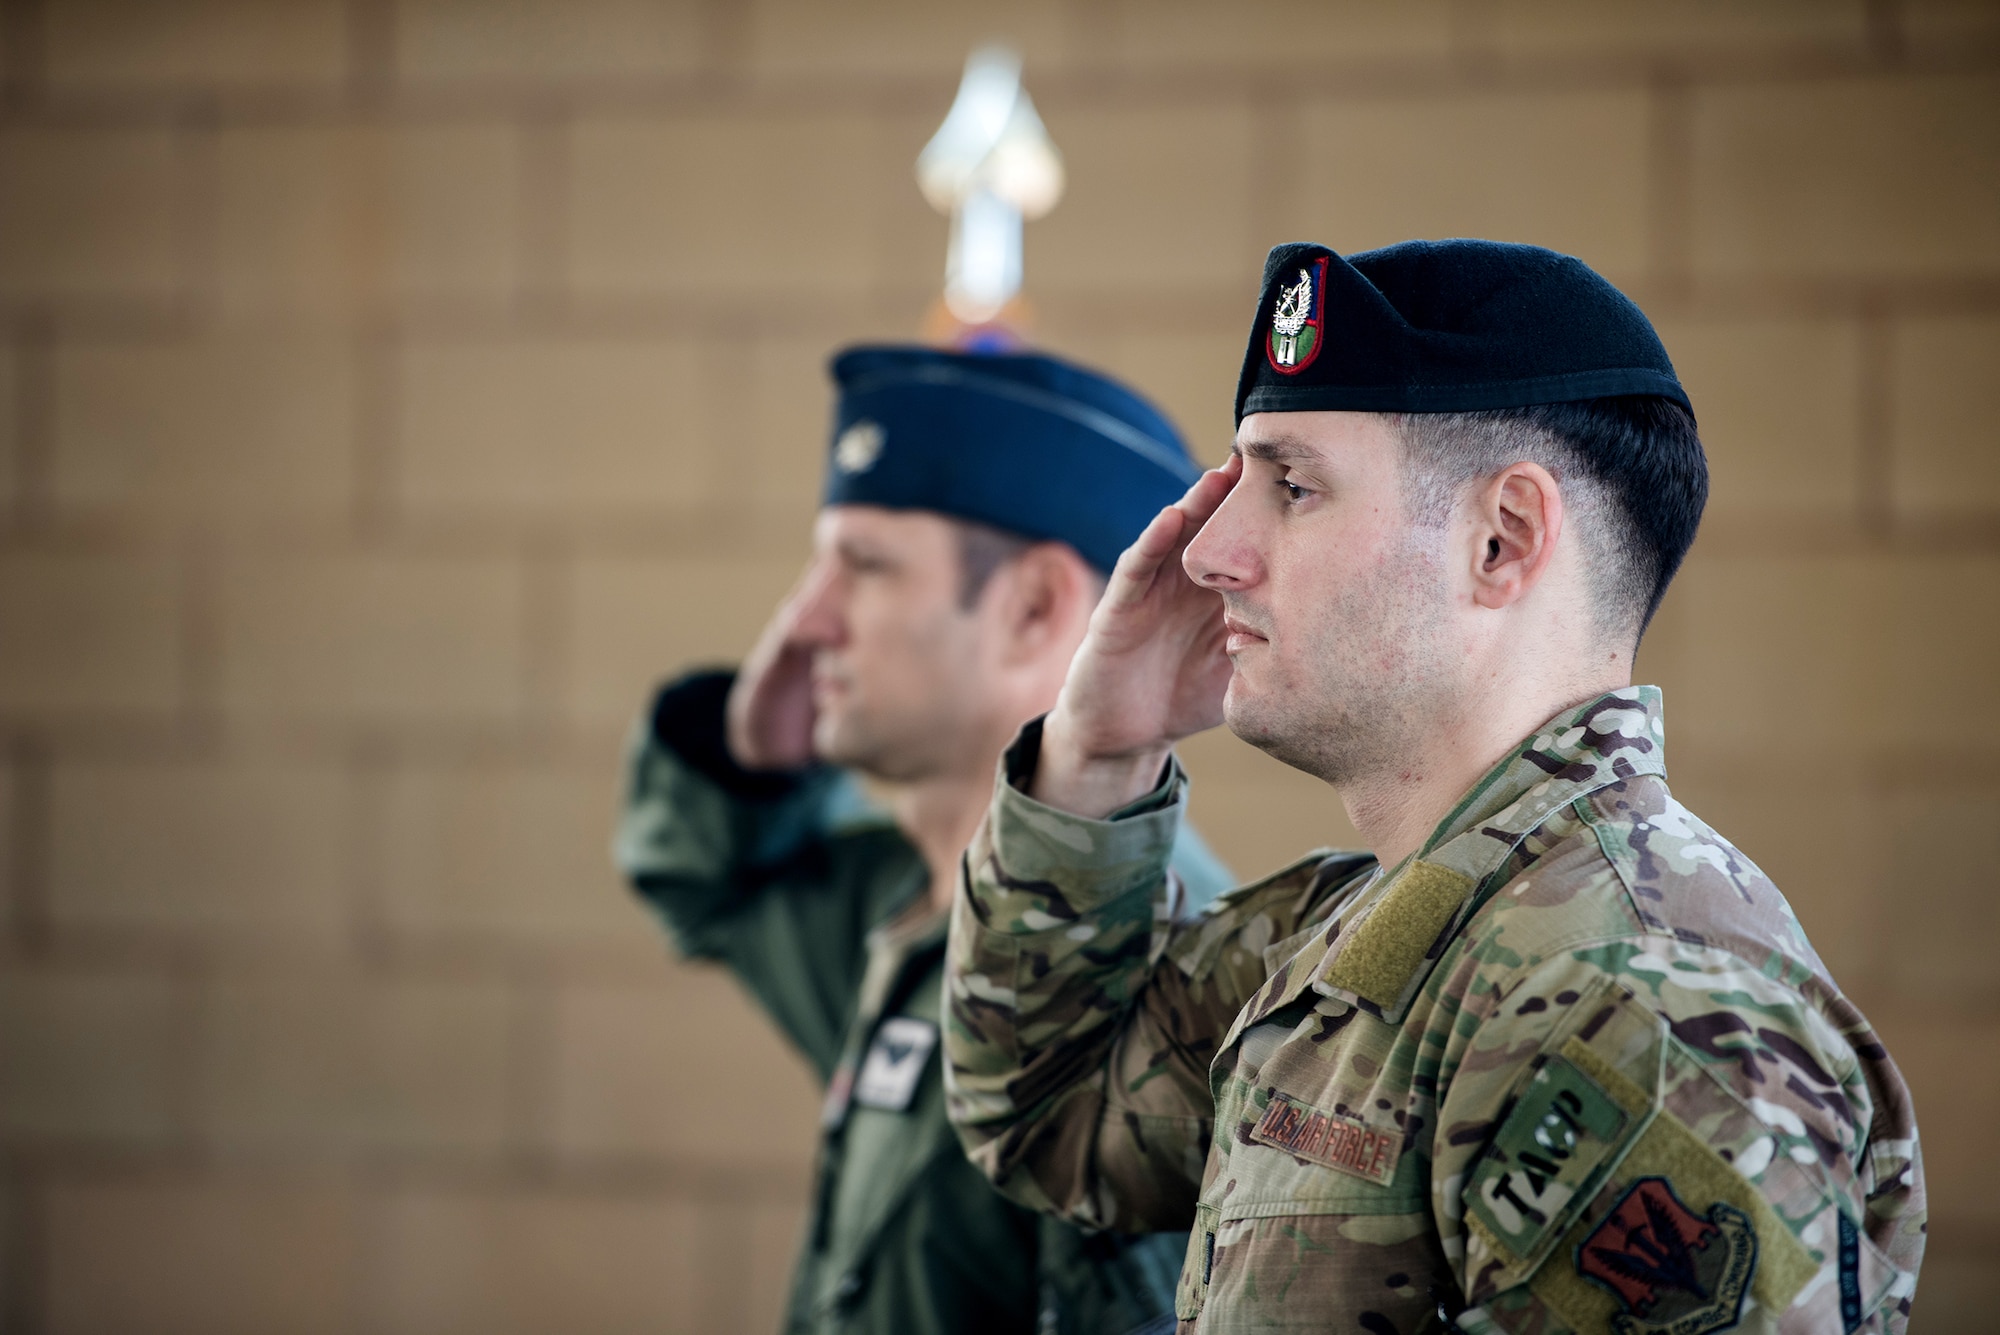 U.S. Air Force Lt. Col. James Kappes (left), 6th Combat Training Squadron operations officer, Camp Bullis, and Capt. Daniel Hill (right), incoming commander, renders a salute during the activation and assumption of command ceremony of Detachment 2, Combat Training Squadron, Sept. 17, 2019, at Joint Base San Antonio-Medina Annex, Texas.